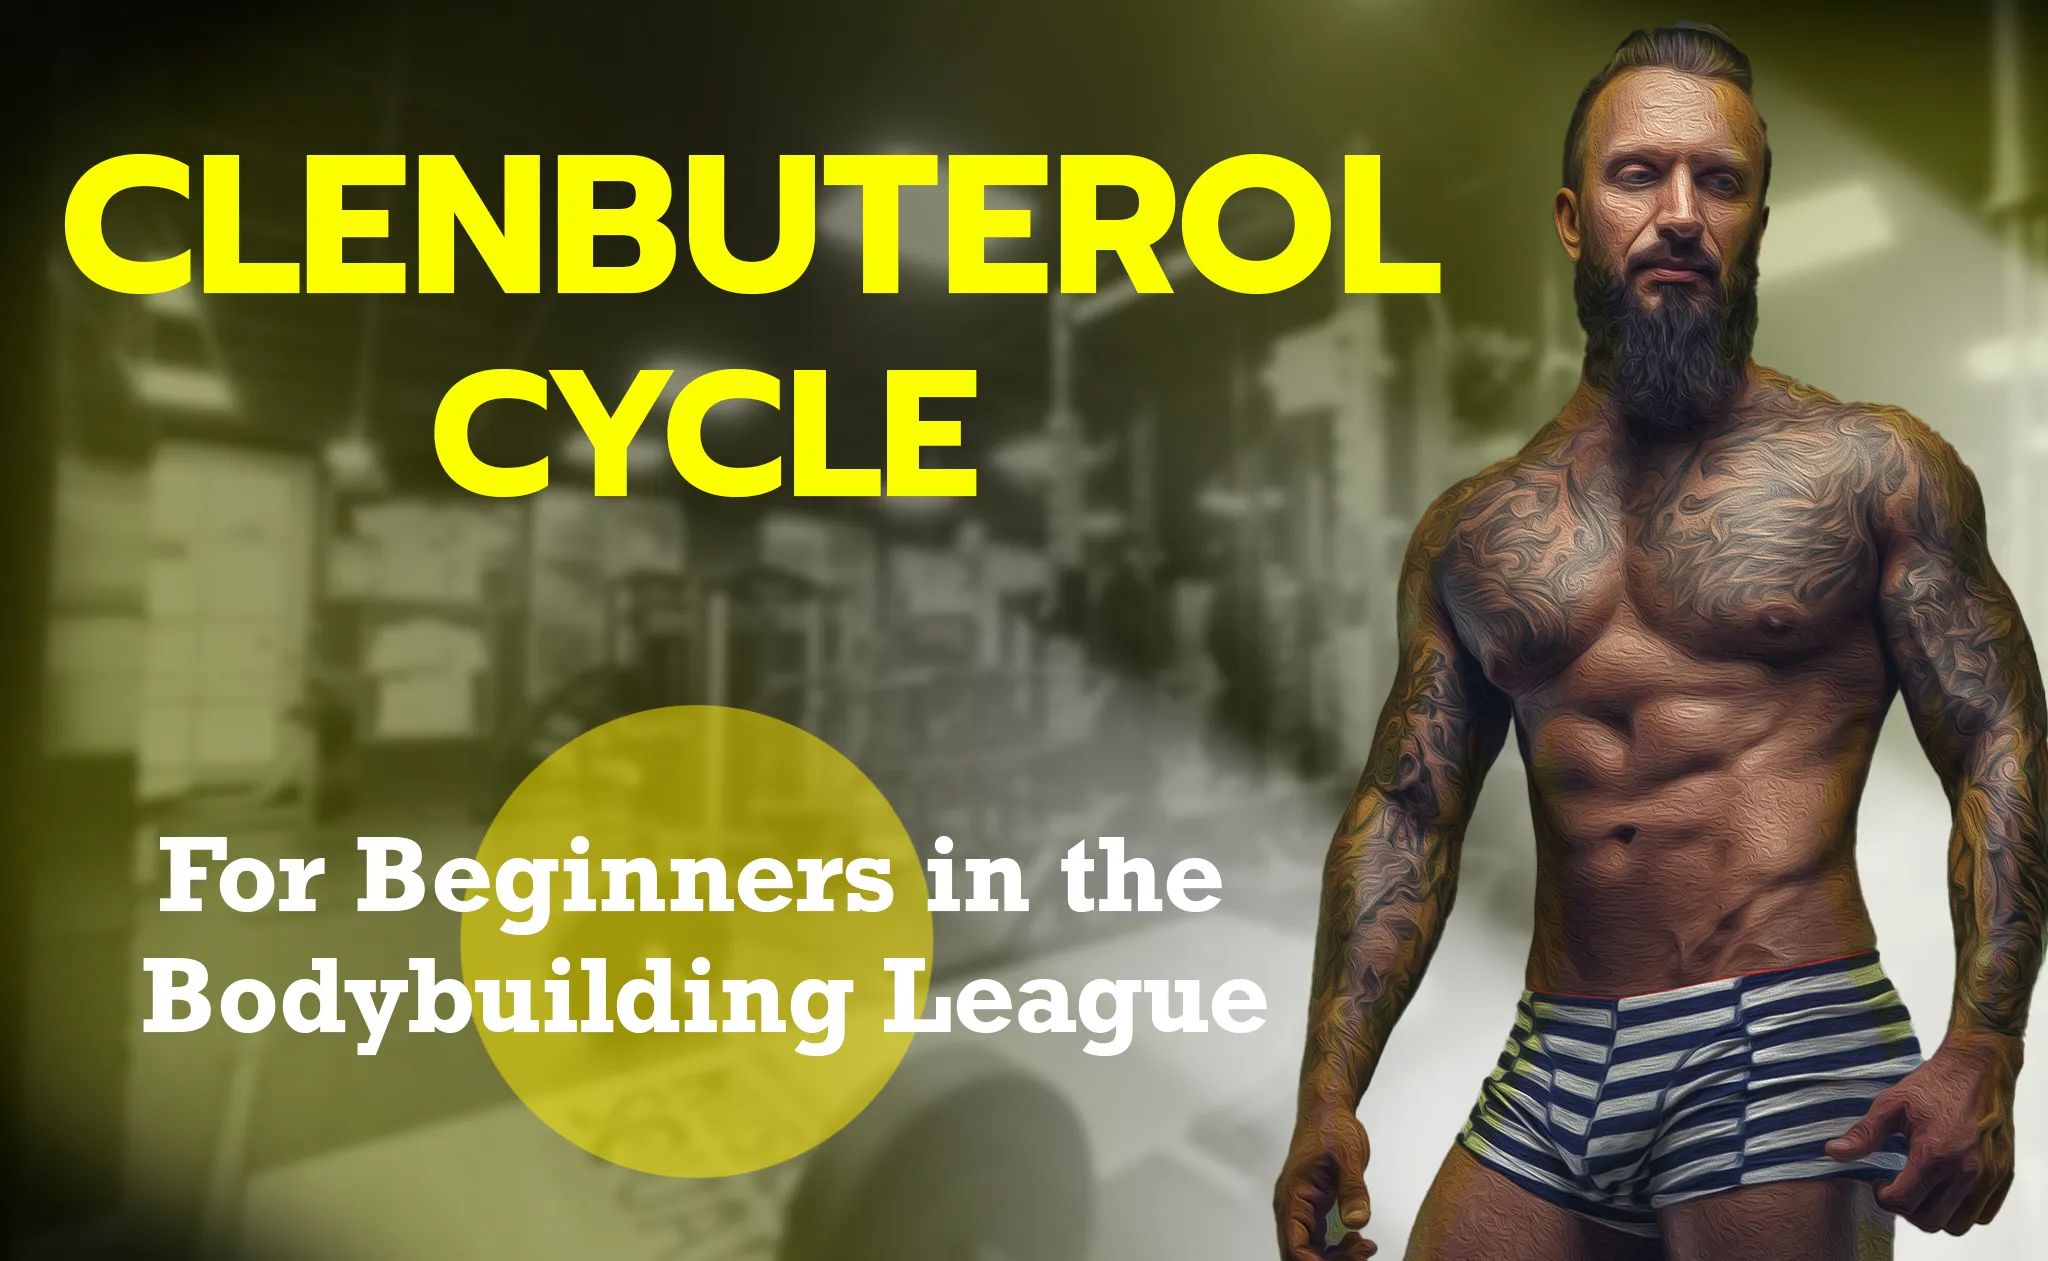 Clenbuterol Cycle for Beginners in the Bodybuilding League